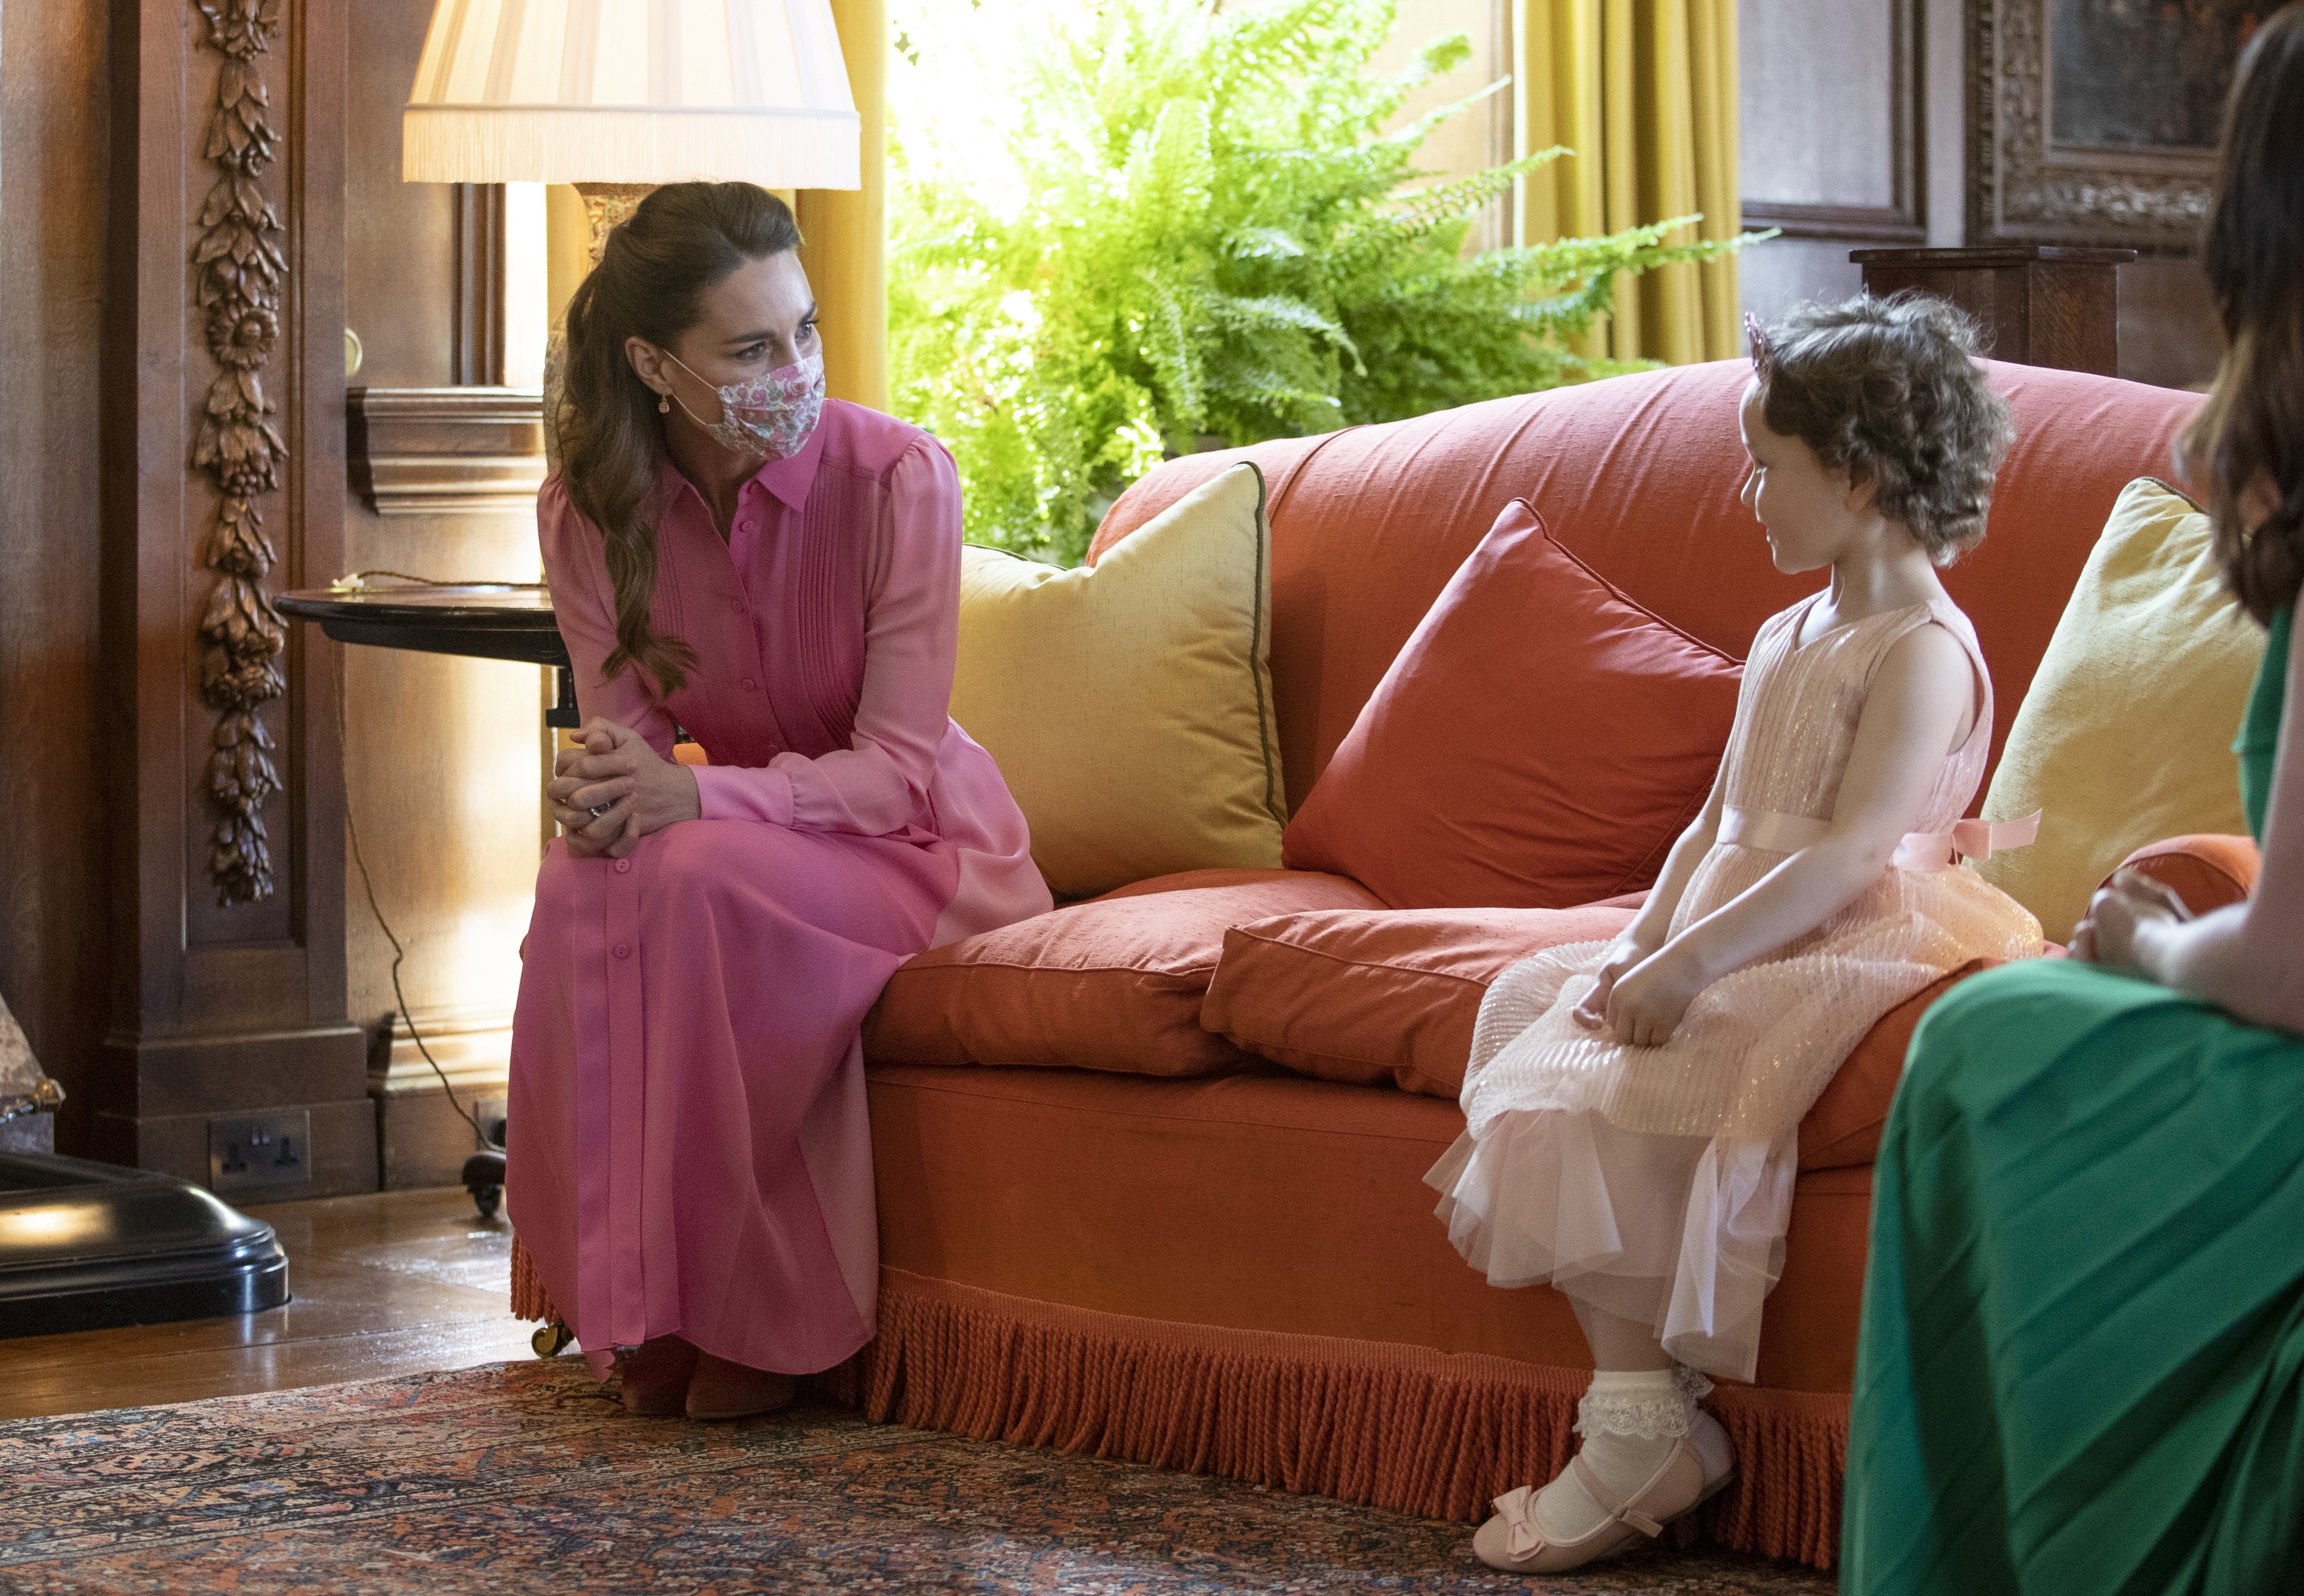 EDINBURGH, SCOTLAND - MAY 27: Catherine, Duchess of Cambridge during her meeting with Mila Sneddon, aged five, and her family, at the Palace of Holyroodhouse on May 27, 2021 in Edinburgh, Scotland. Cancer patient Mila features in an image from the Hold St (Foto: Getty Images)